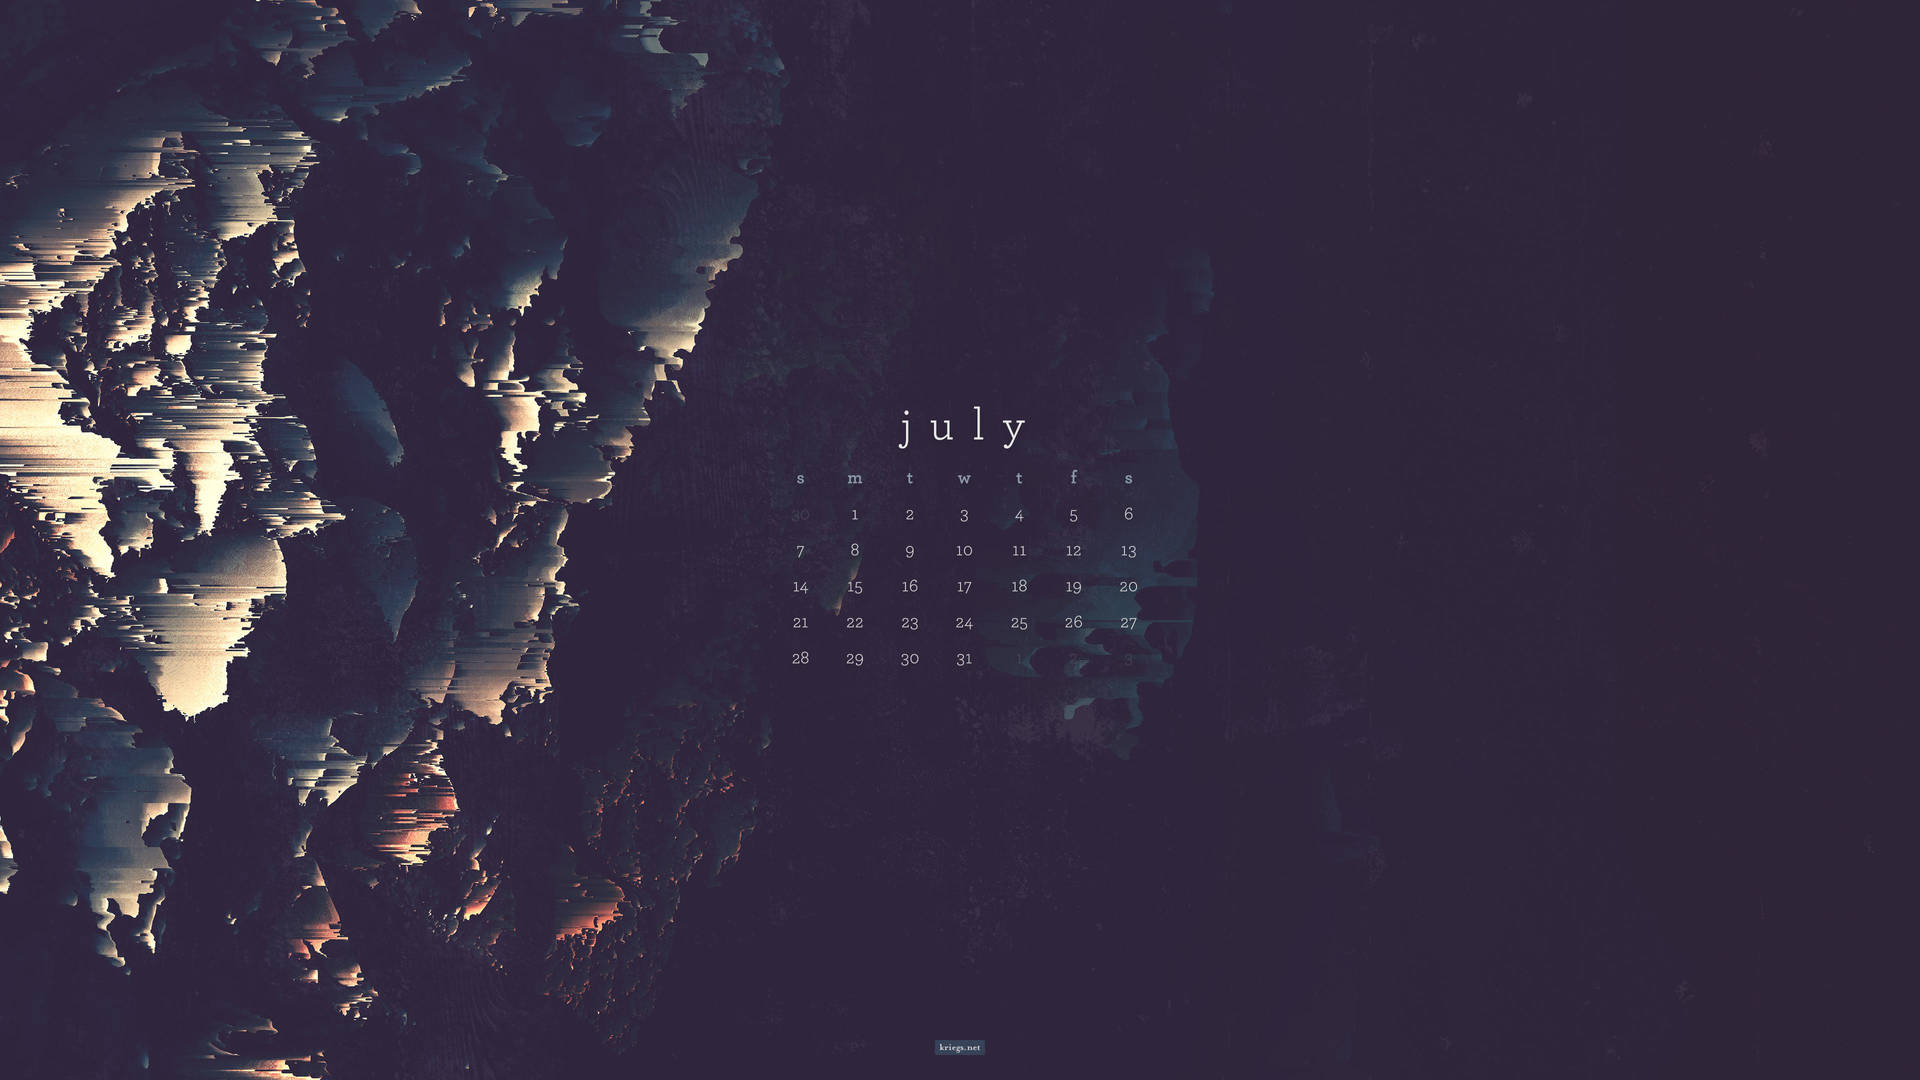 Stay Organized With The July 2019 Calendar Background